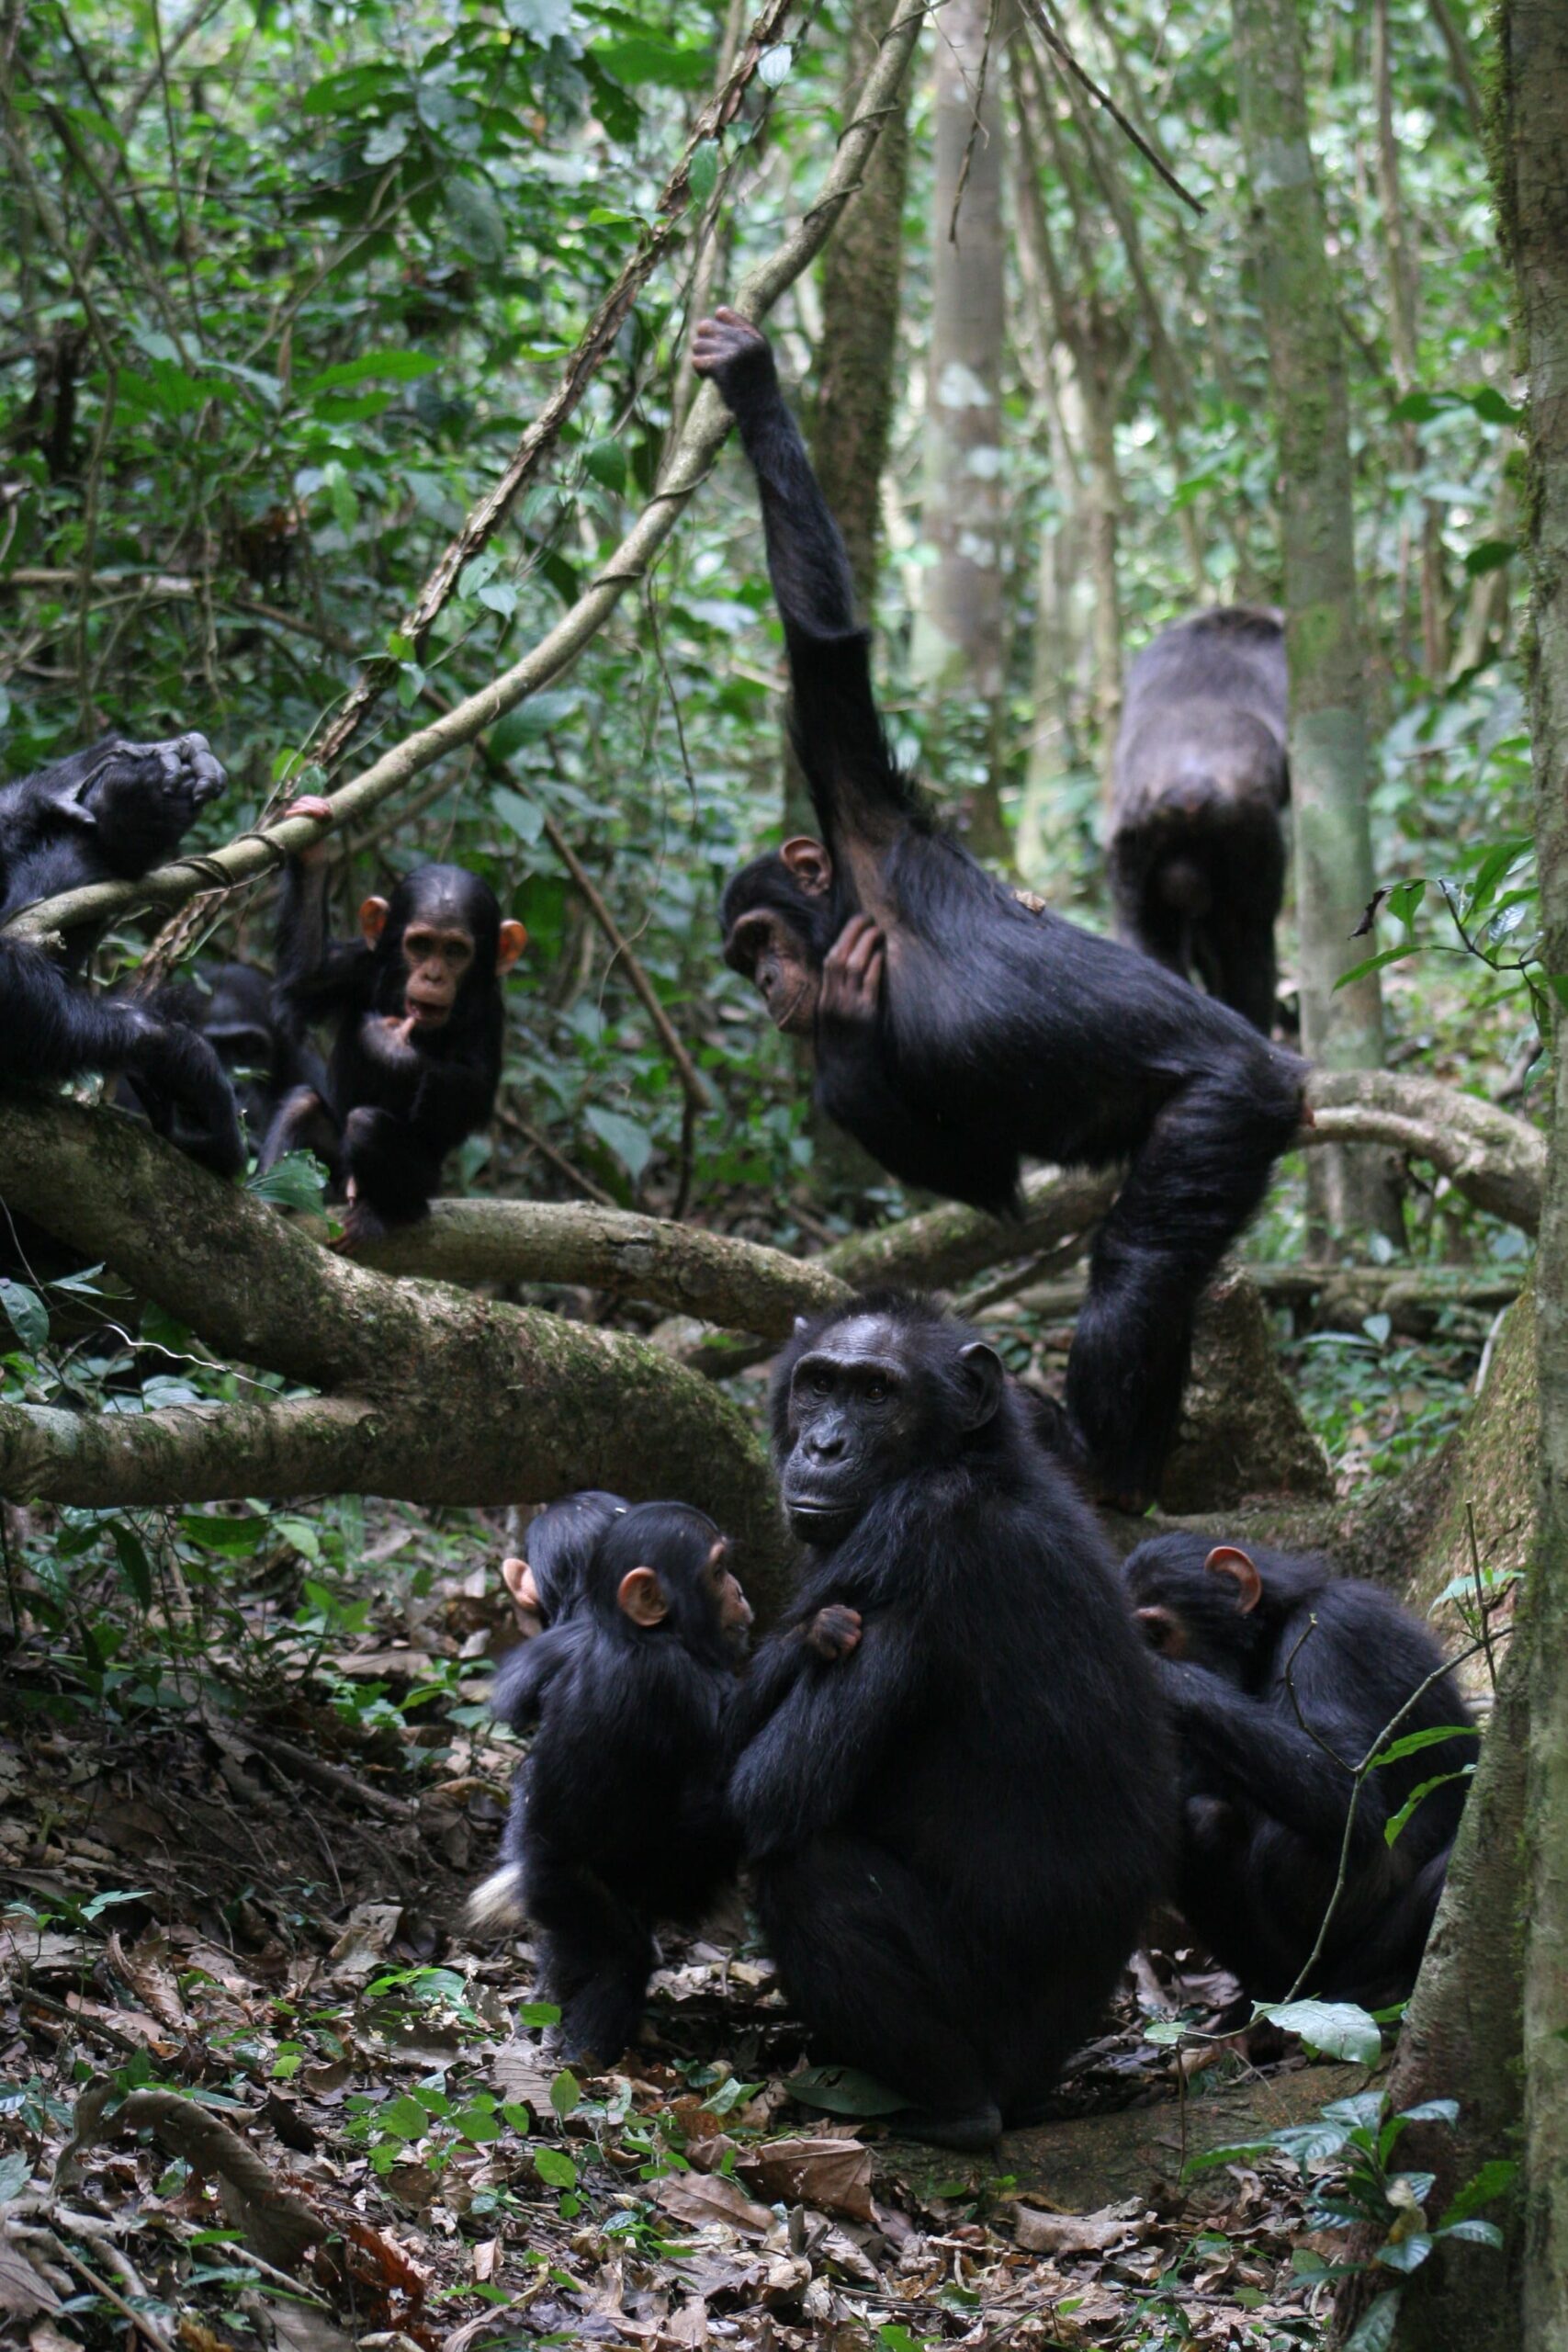 Group of chimpanzees including mothers, juveniles, subadults, and infants grooming and playing. Credit: Catherine Hobaiter